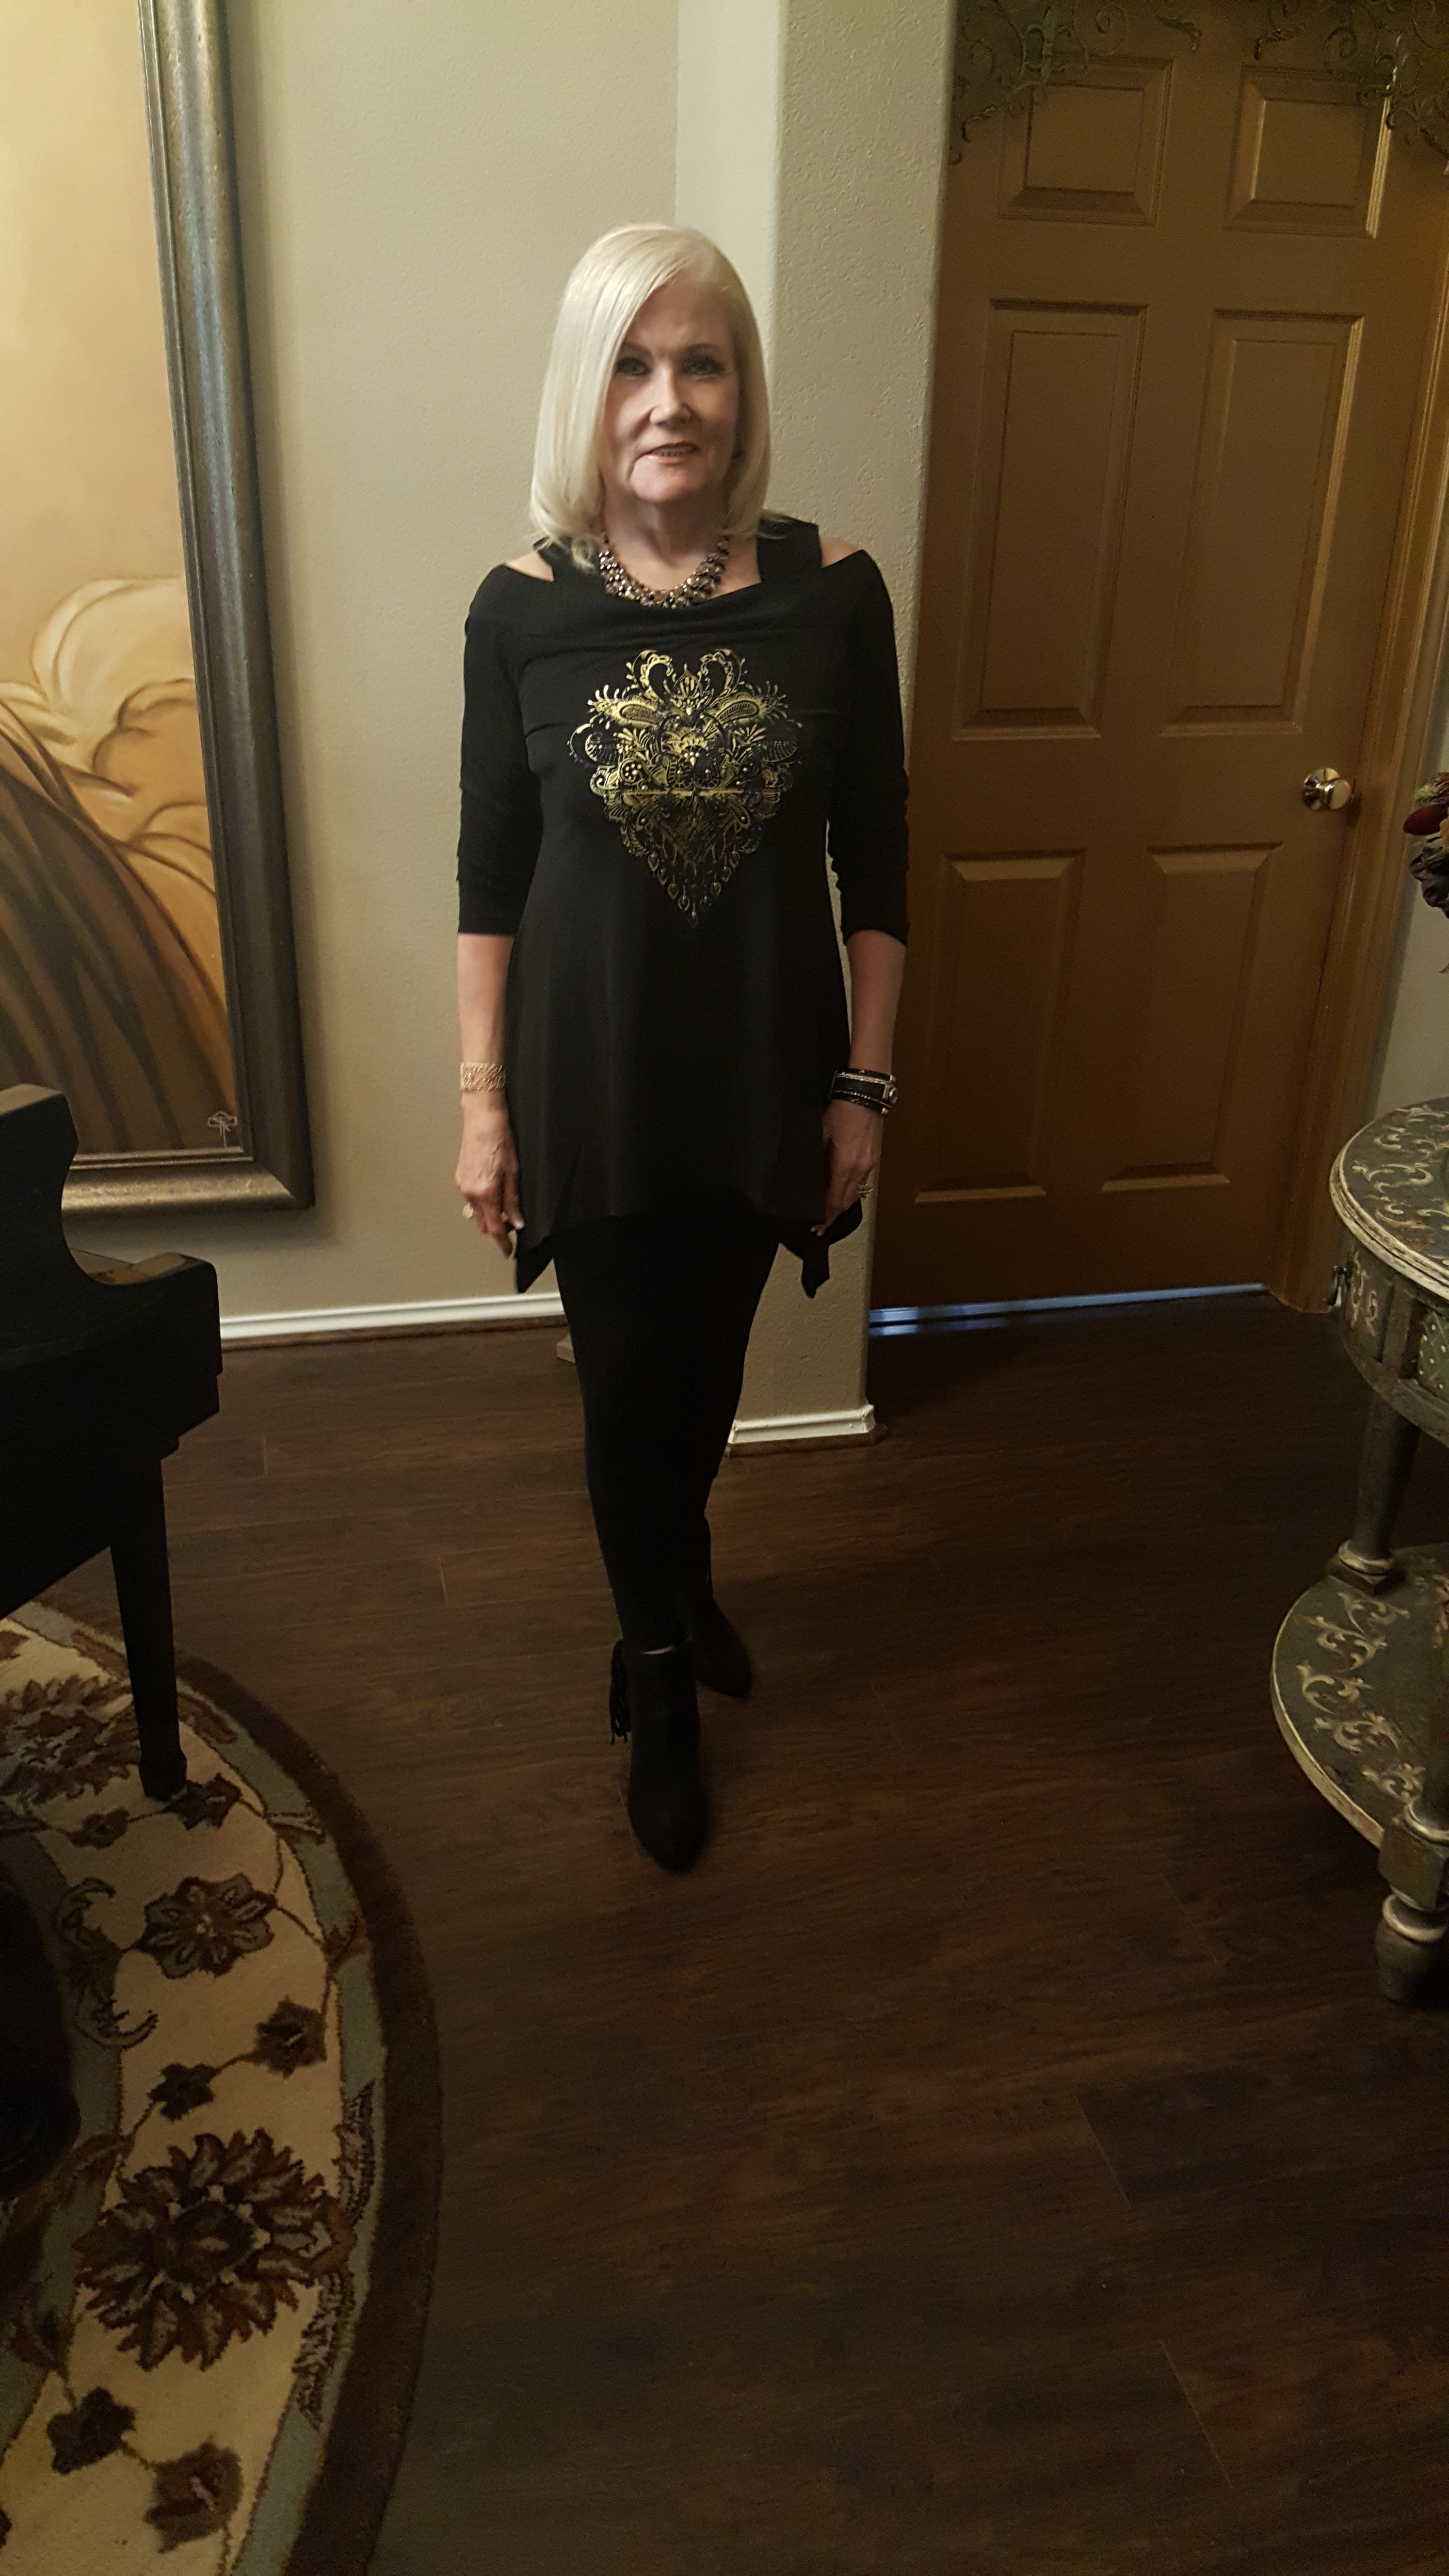 A Midnight Velvet customer in a black cold-shoulder top with a gold floral design, black leggings, and black booties.